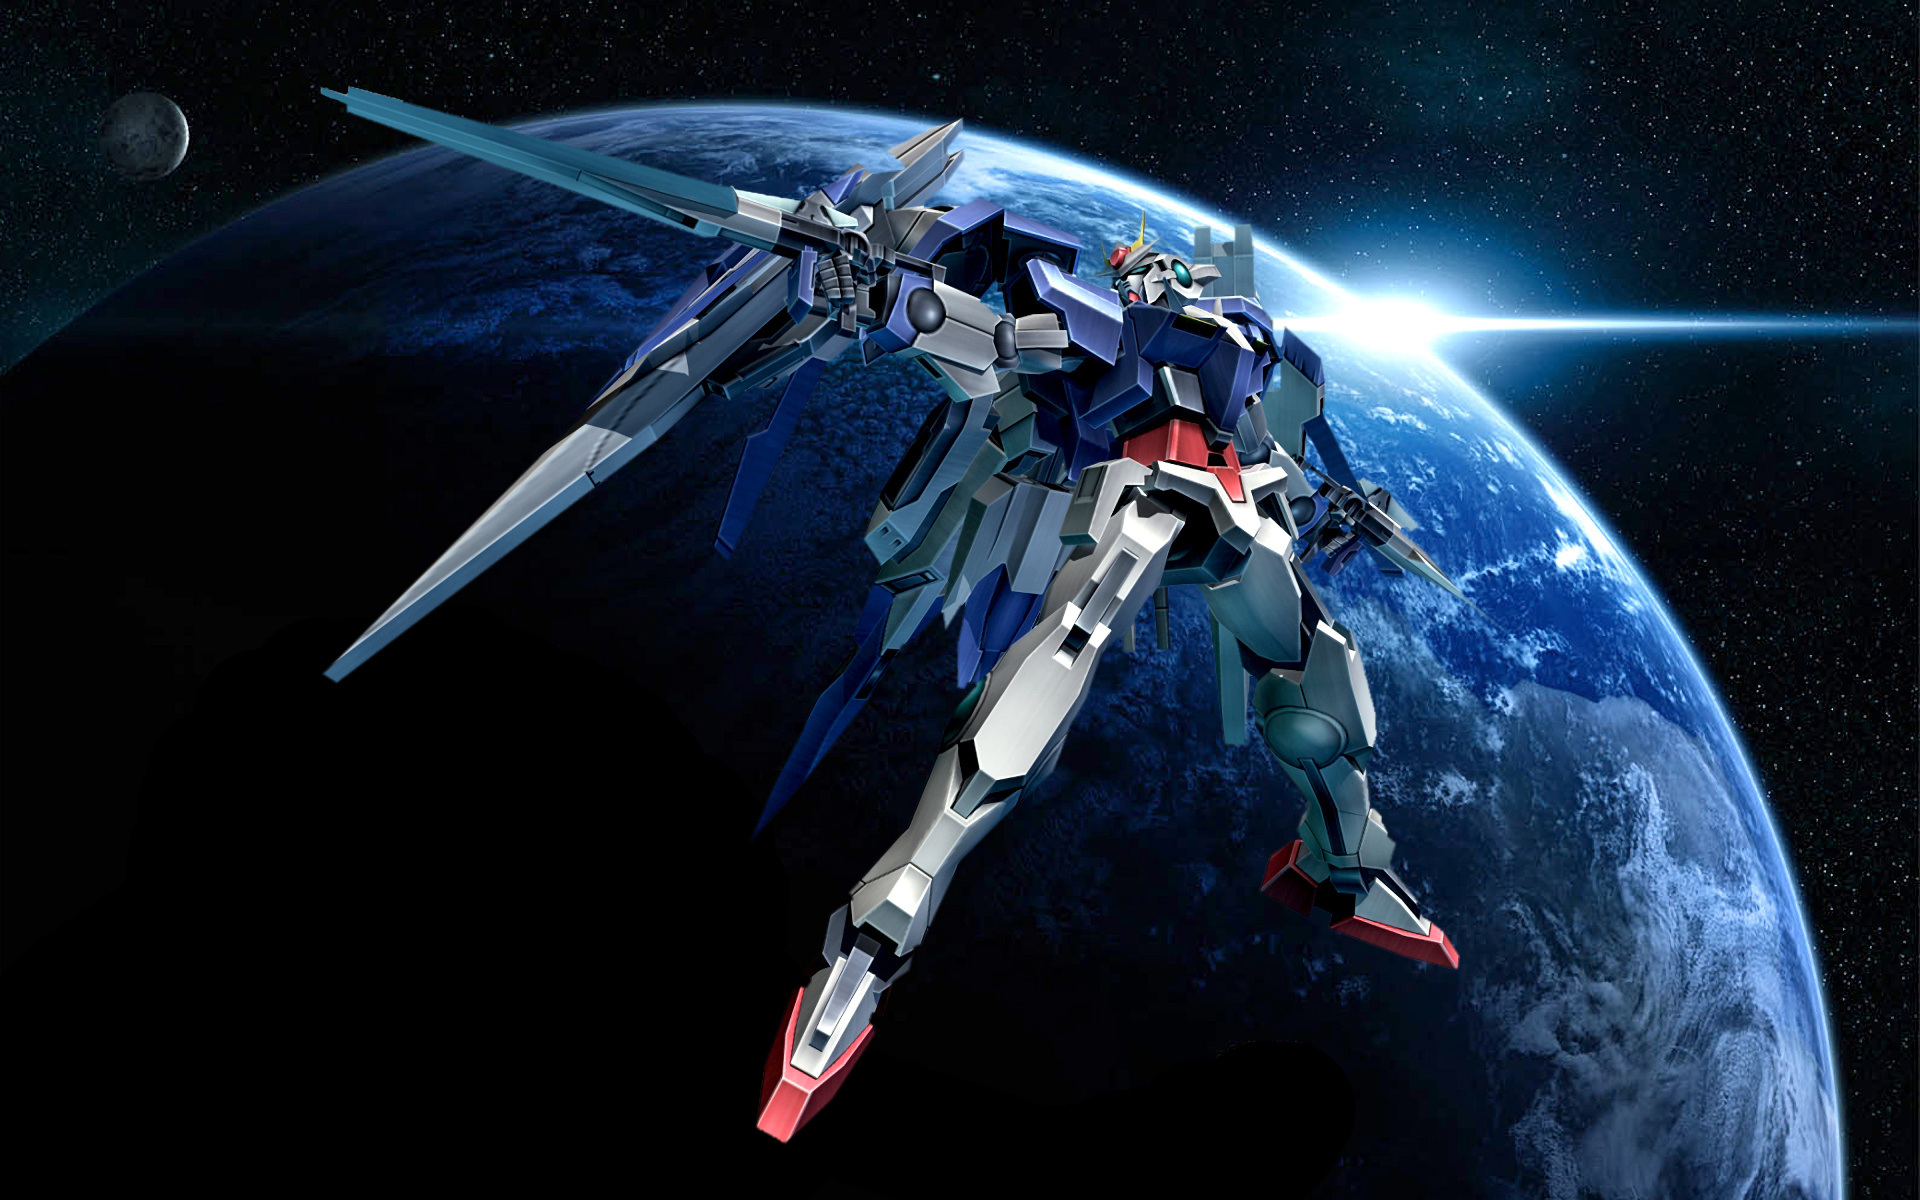 Anime Mobile Suit Gundam 00, HD wallpapers and backgrounds, 1920x1200 HD Desktop